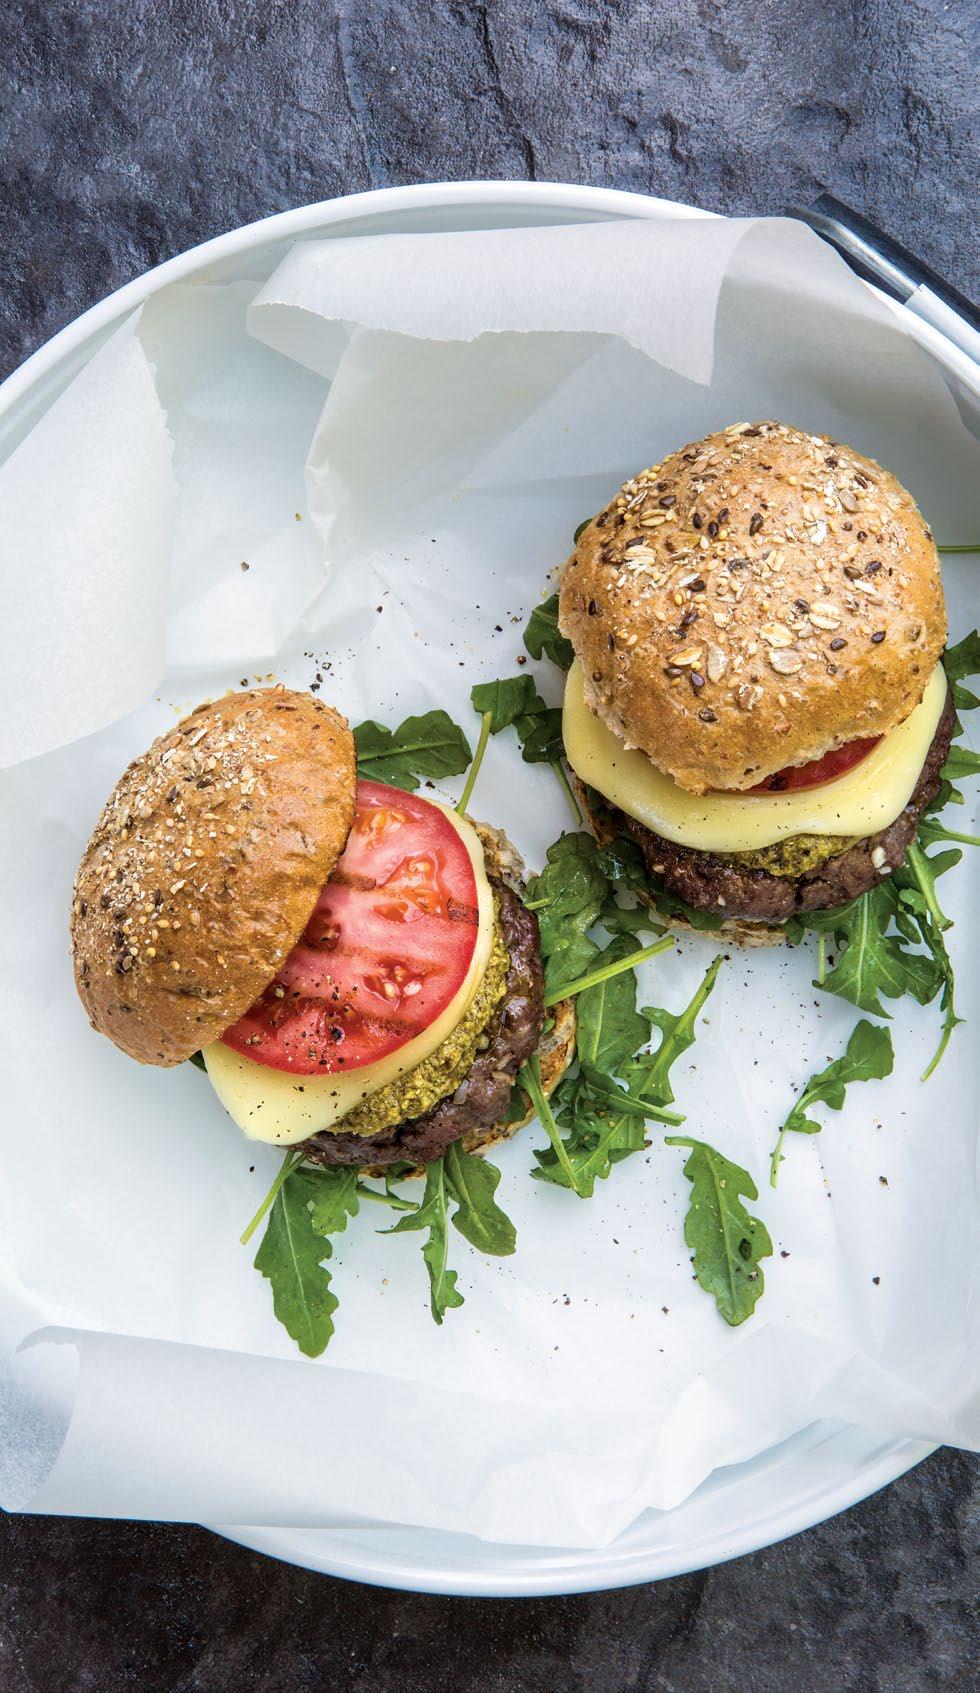 Pesto & Balsamic Beef Burgers In this play on Italian flavors, pesto, mozzarella and punchy greens brighten and elevate the classic beef burger.